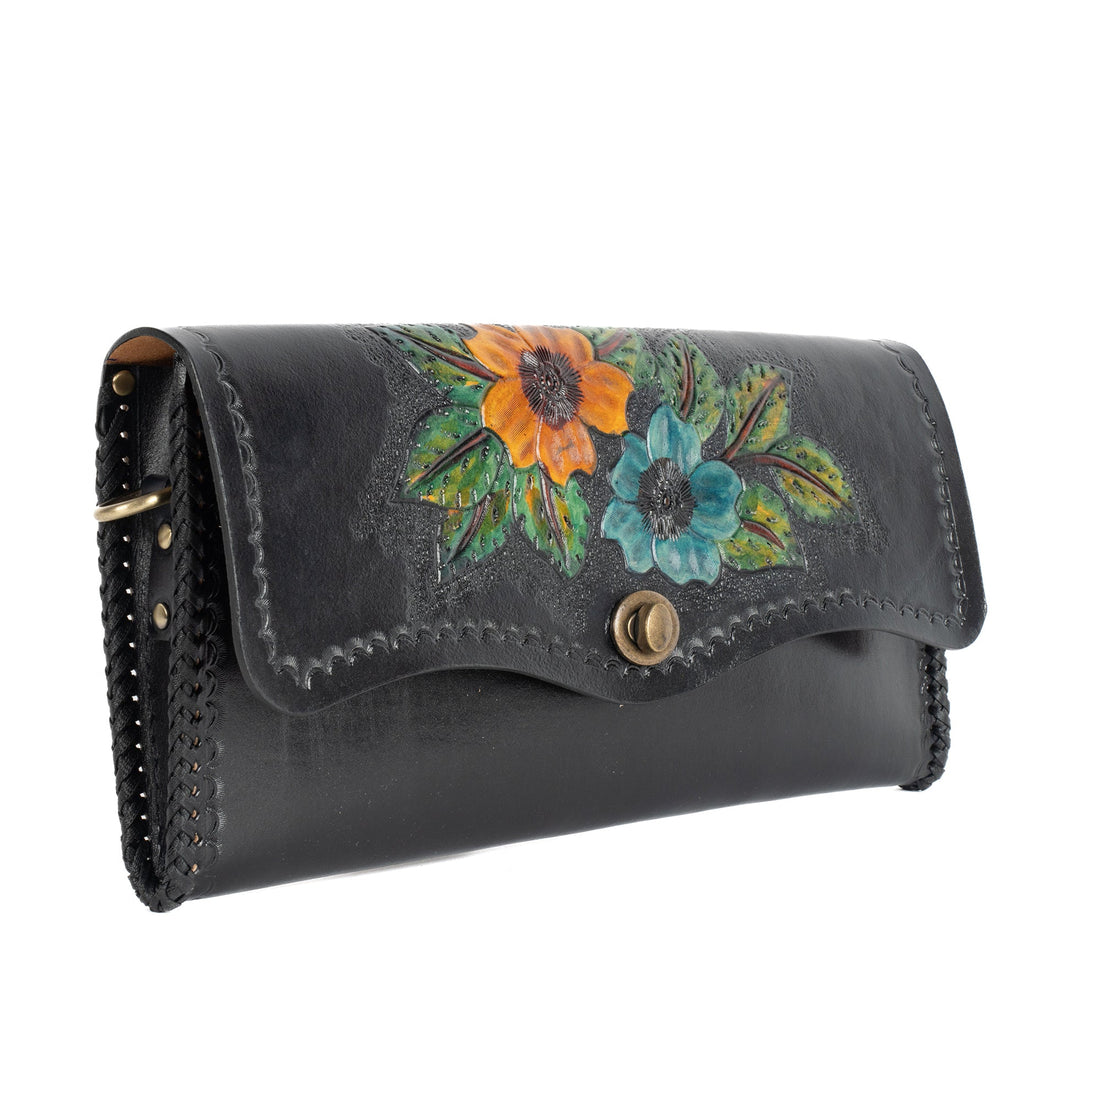 Two Roses Black Leather Carved & Crafted Hand Bag - Handbags Zengoda Shop online from Artisan Brands